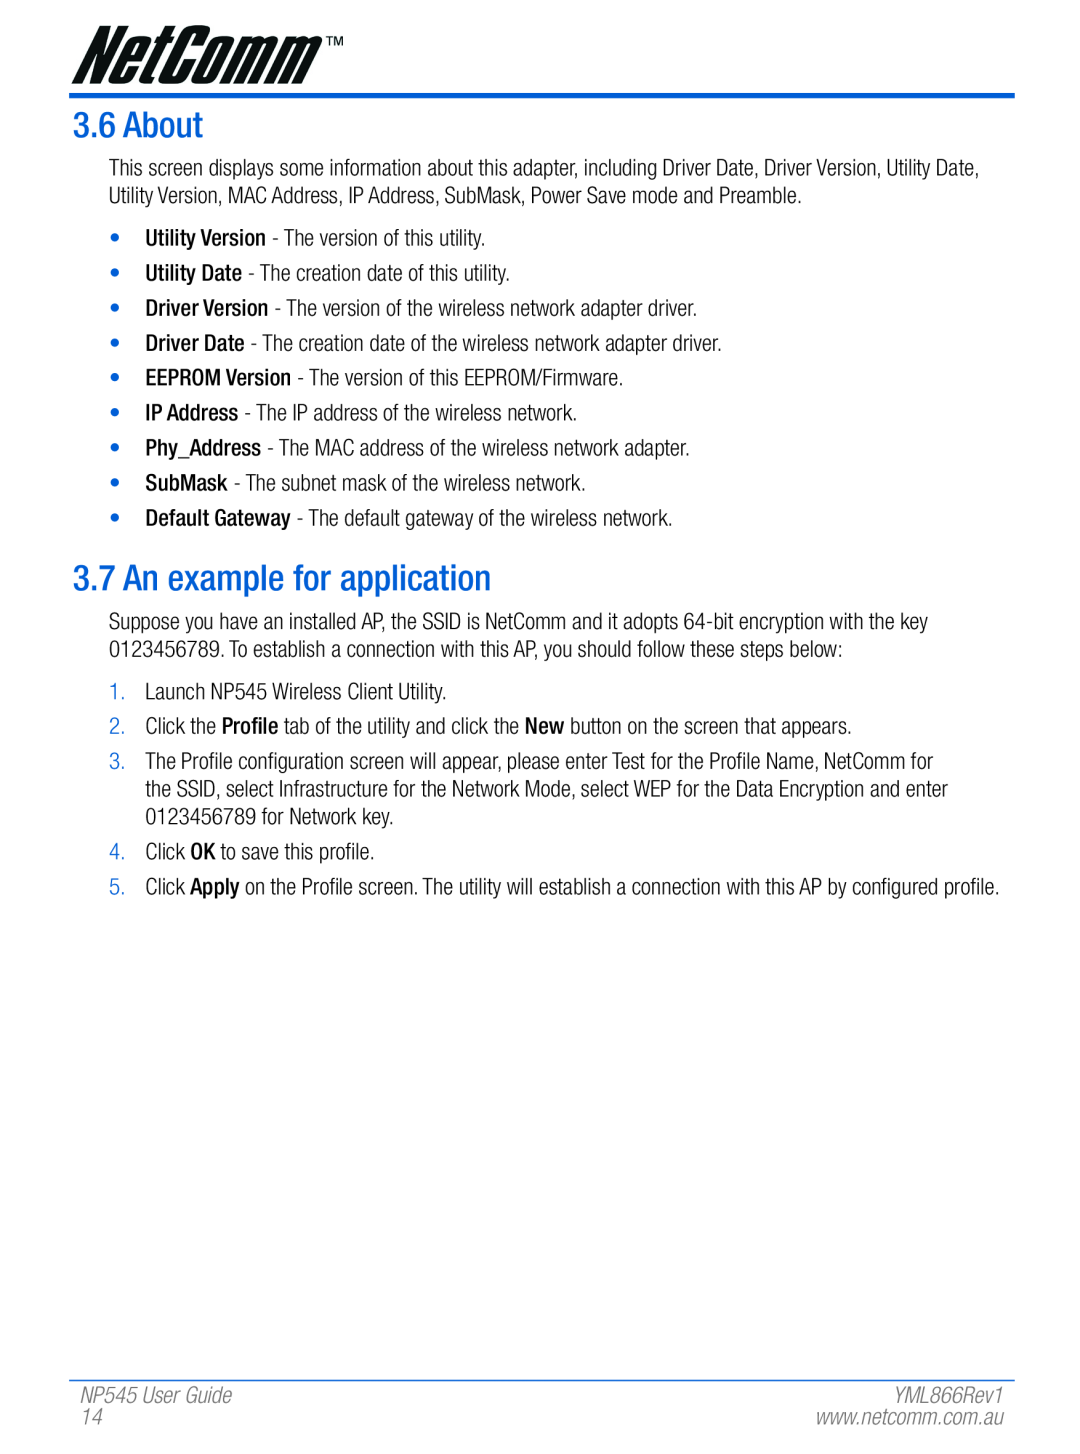 NetComm manual About, An example for application, NP545 User Guide 